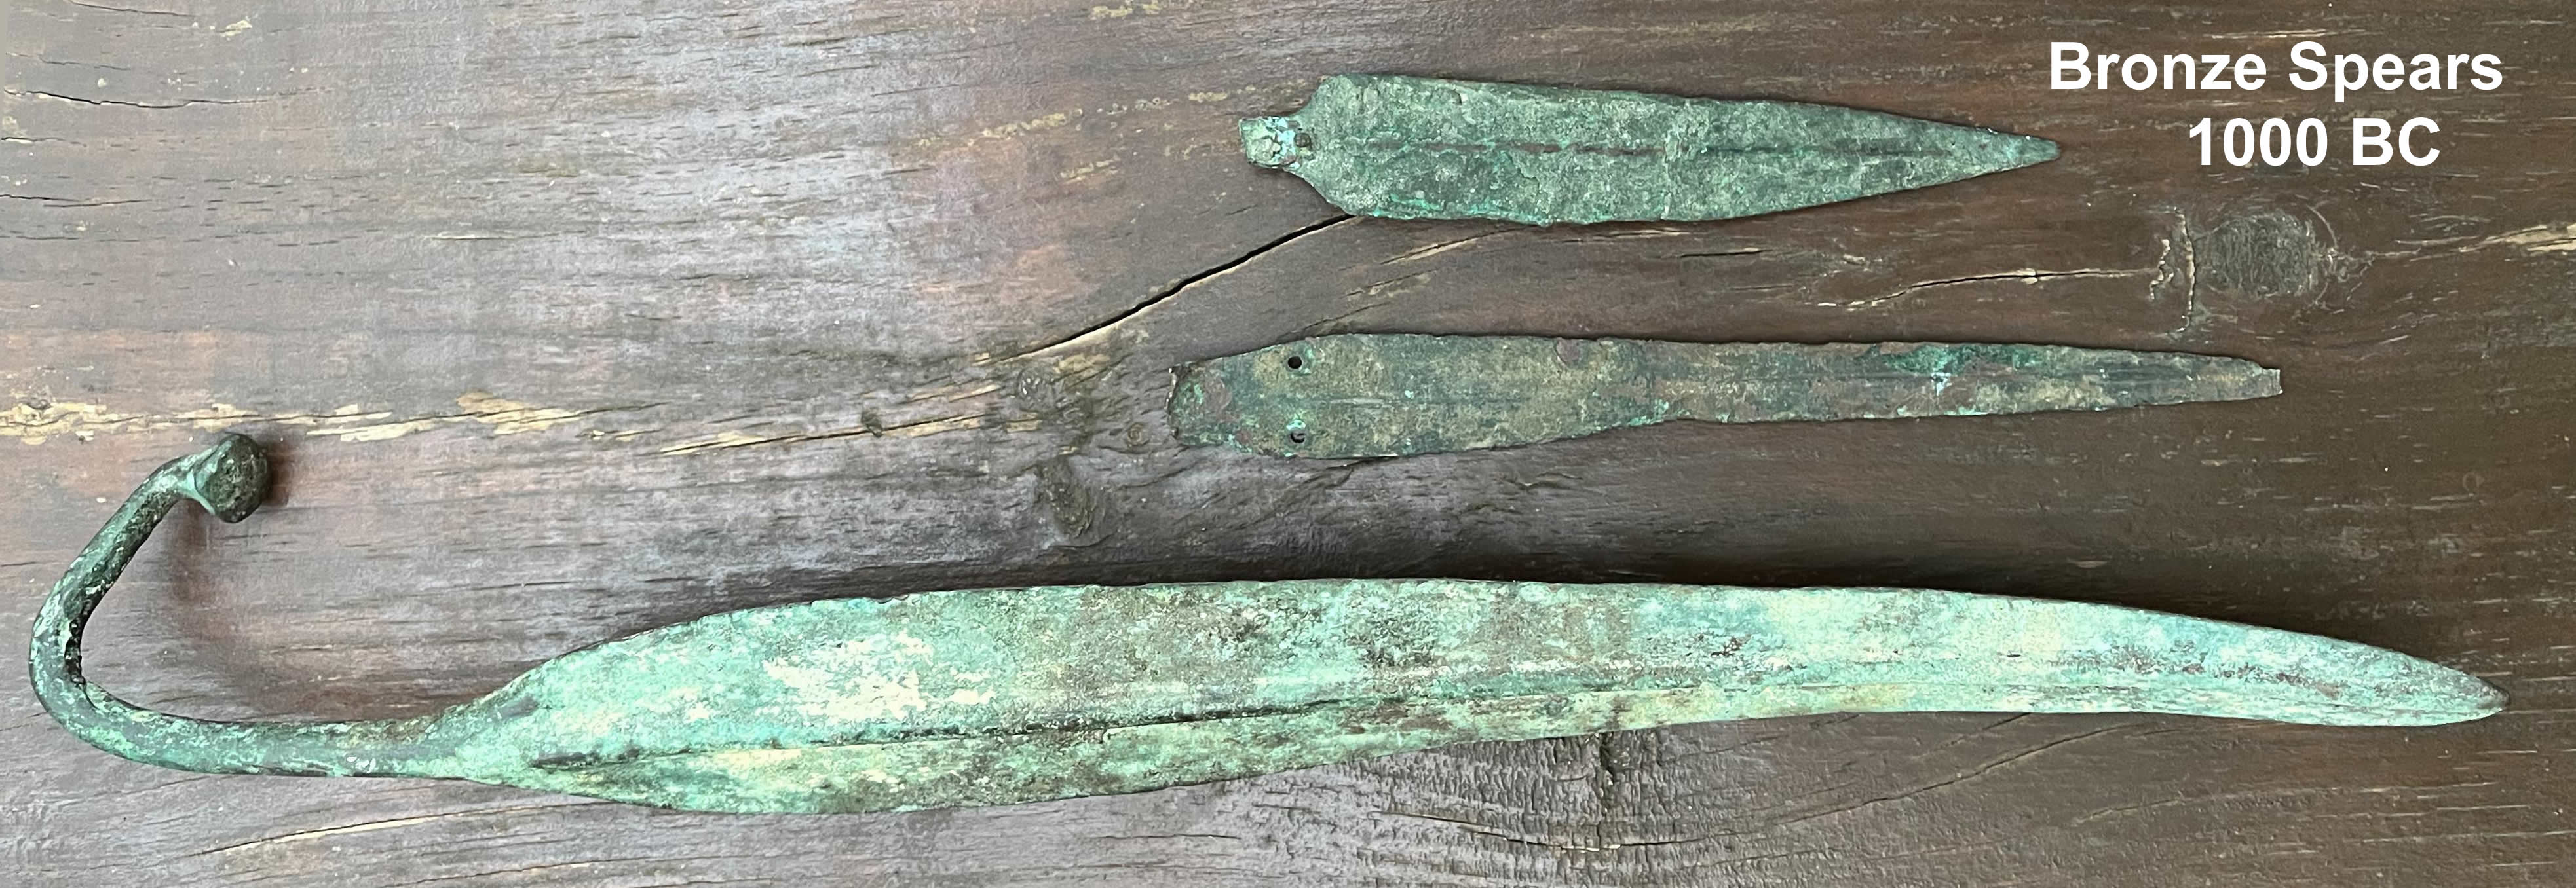 Group 1000 BC Three Bronze Spears on table